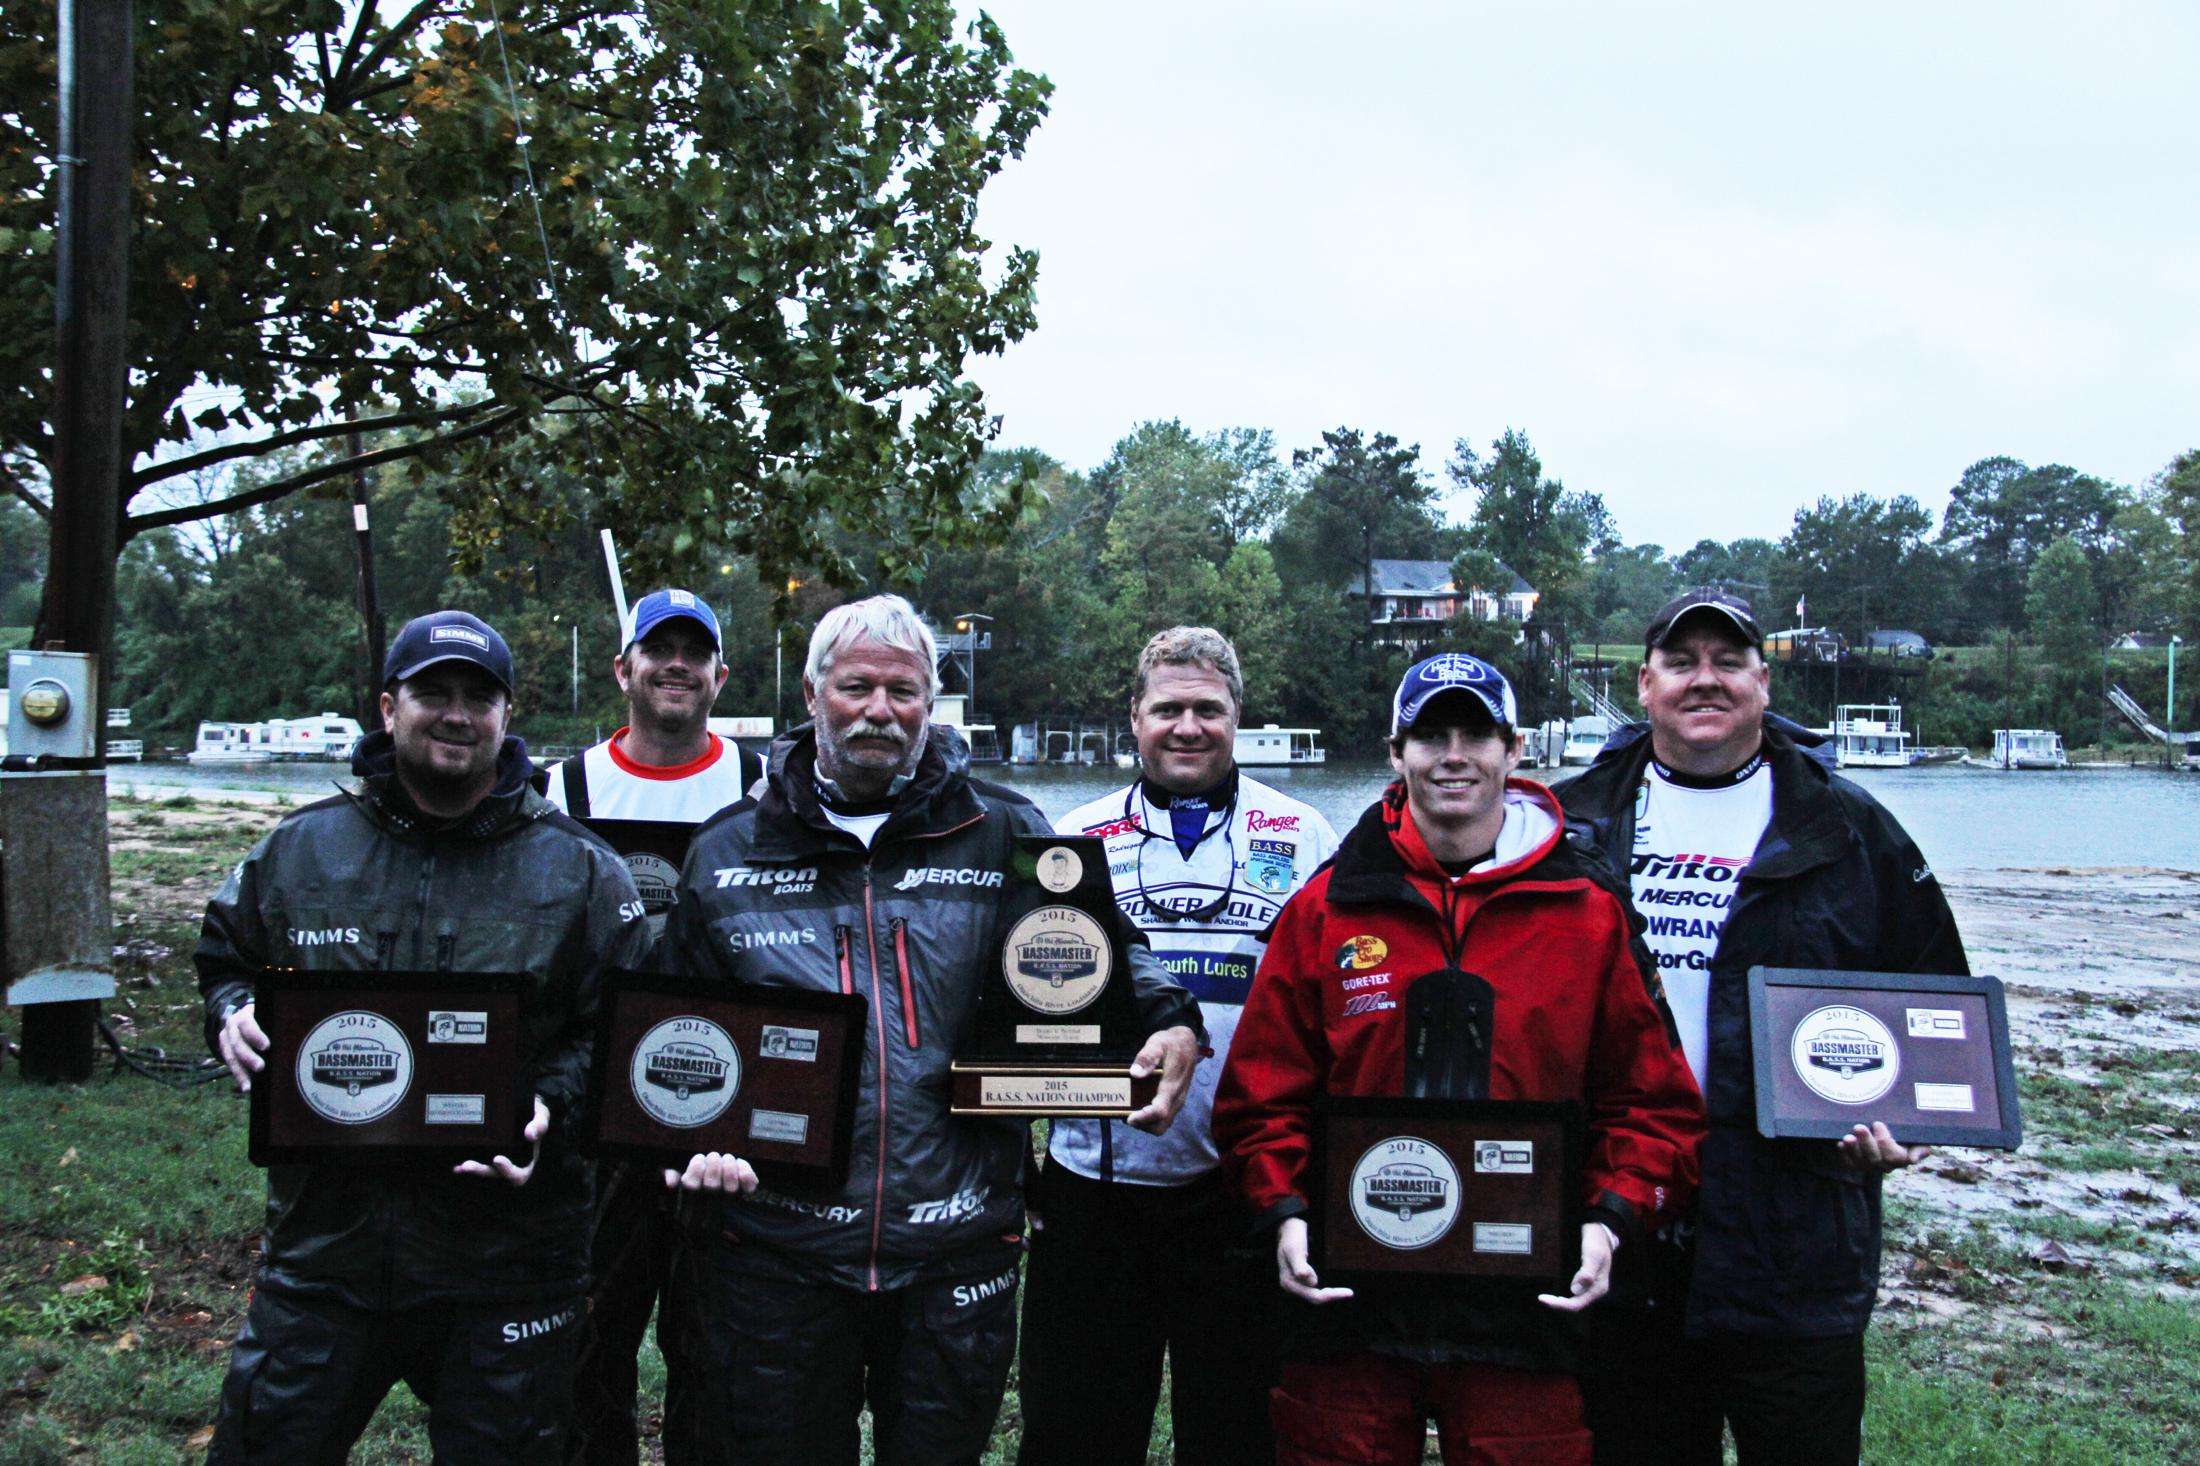 The 2015 B.A.S.S. Nation Champions. From left: Western Division champion Levi McNeill, Southern Division champion John Proctor, 2015 B.A.S.S. Nation champion and Central Division champion Albert Collins, Mid-Atlantic Division champion Fabian Rodriguez, Northern Division champion Greg Vance, and Eastern Division champion Charles Sim. 